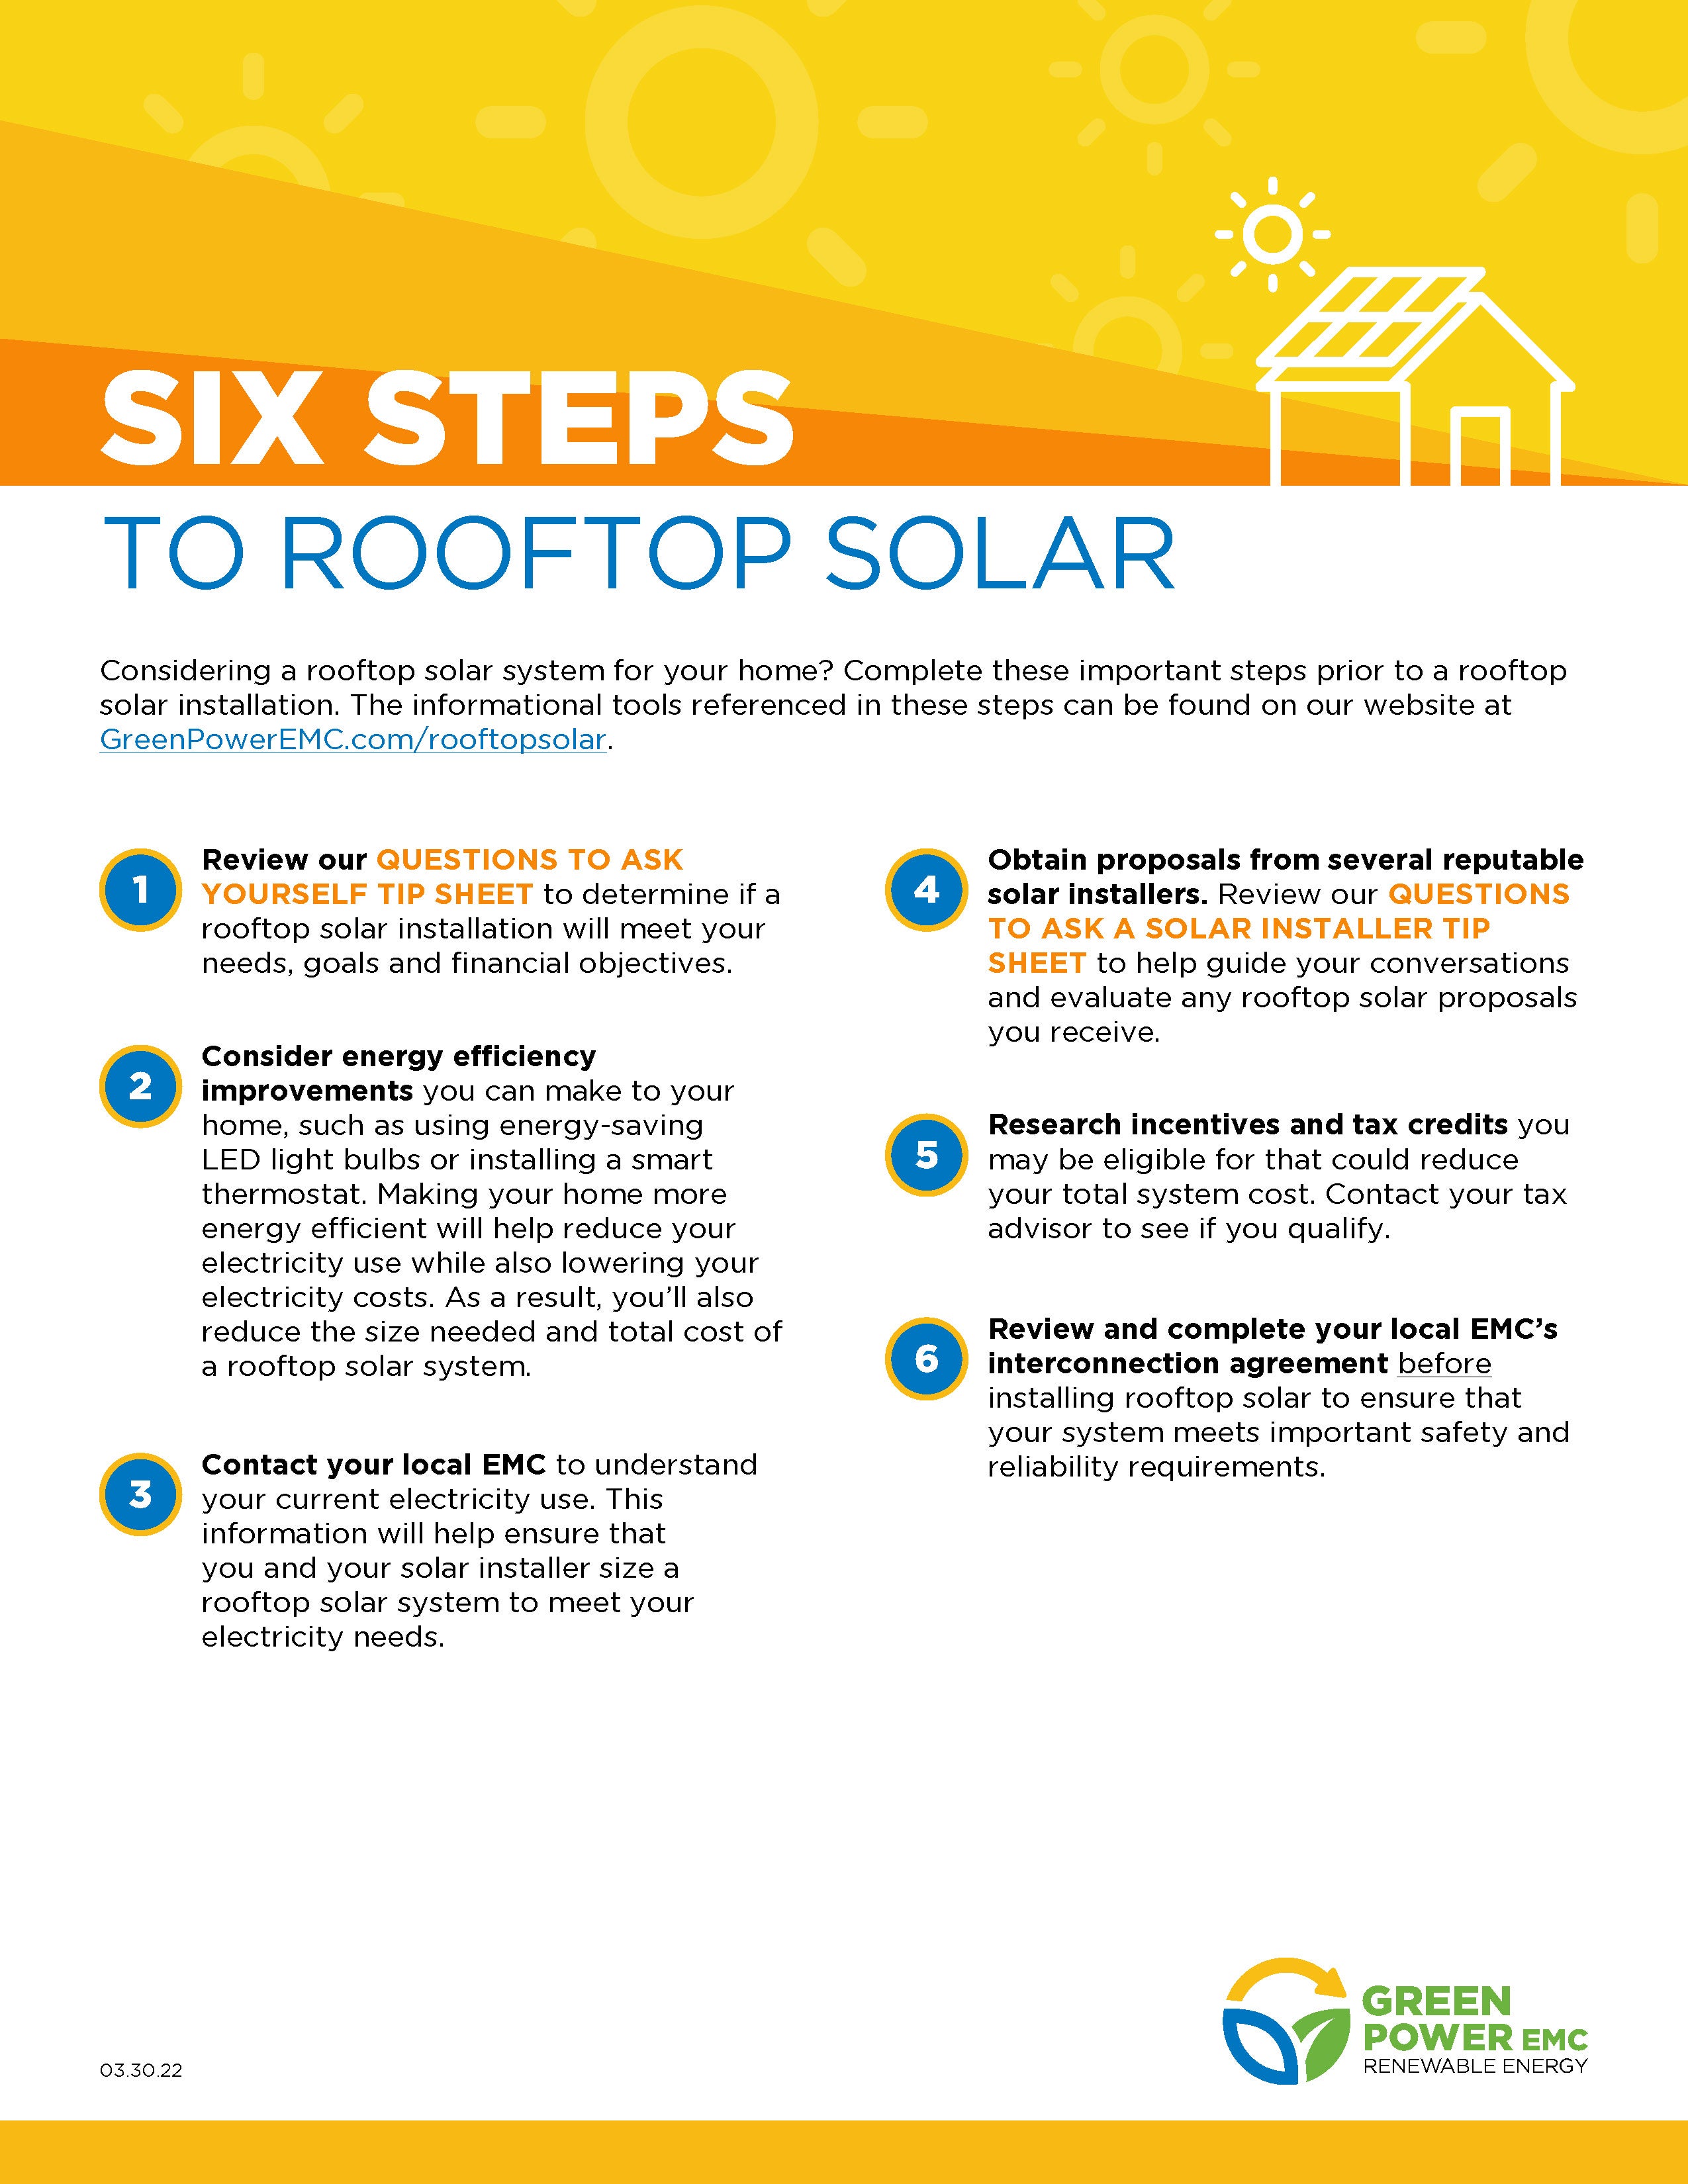 6 Steps to Rooftop Solar